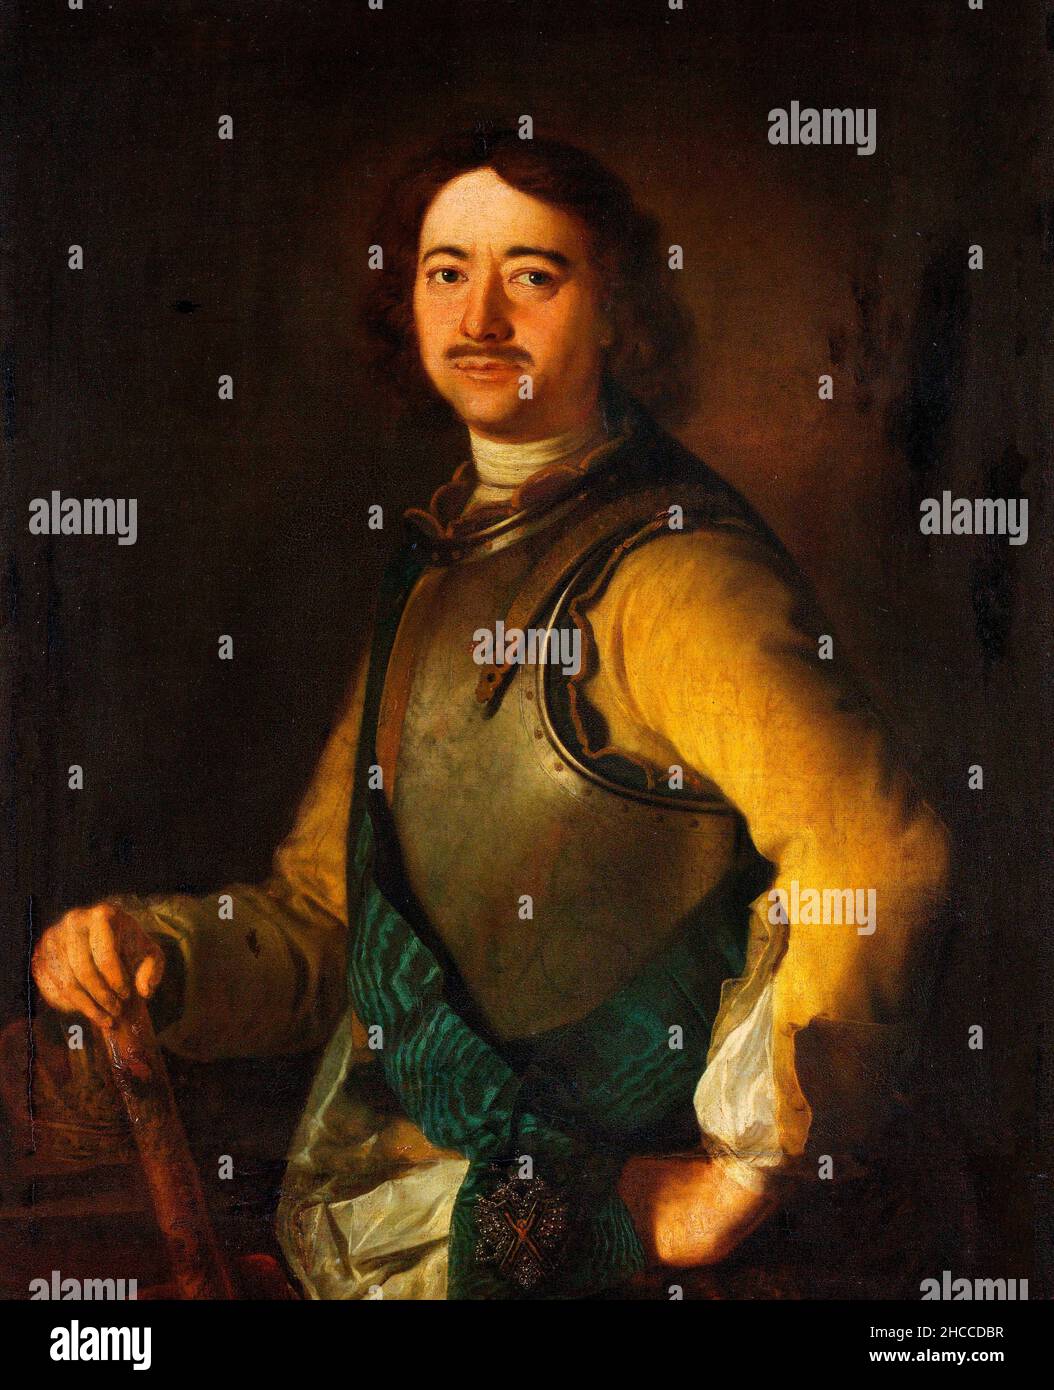 Peter the Great. Portrait of Tsar Peter I of Russia (1672-1725),  oil on canvas, 18th century Stock Photo